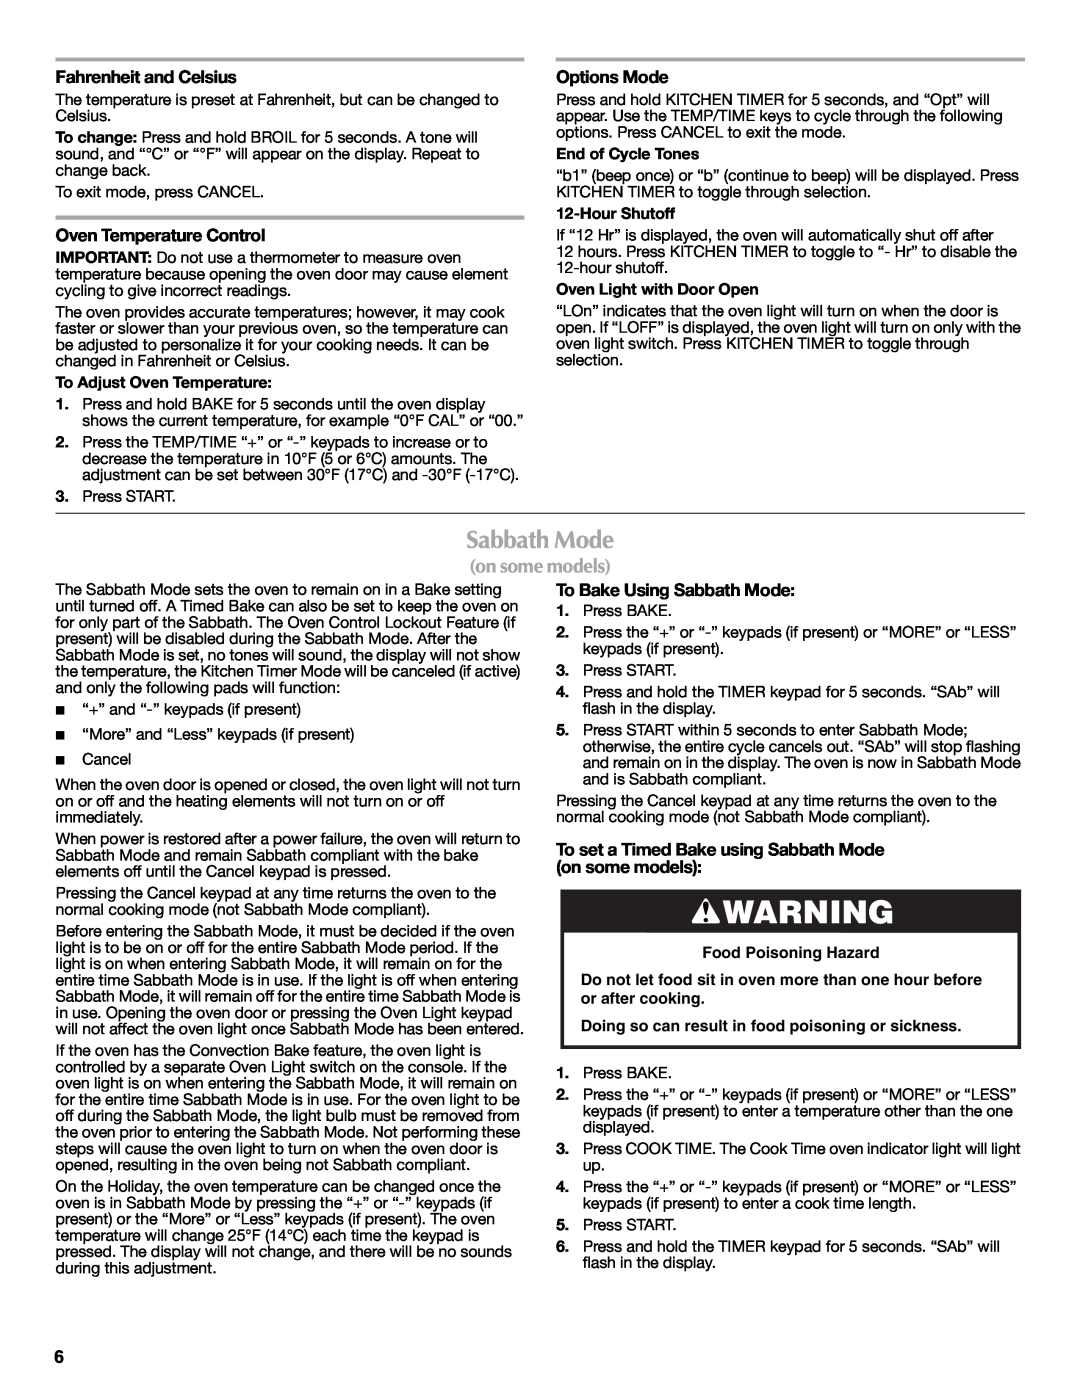 Maytag W10419390A warranty Sabbath Mode, on some models, Fahrenheit and Celsius, Oven Temperature Control, Options Mode 